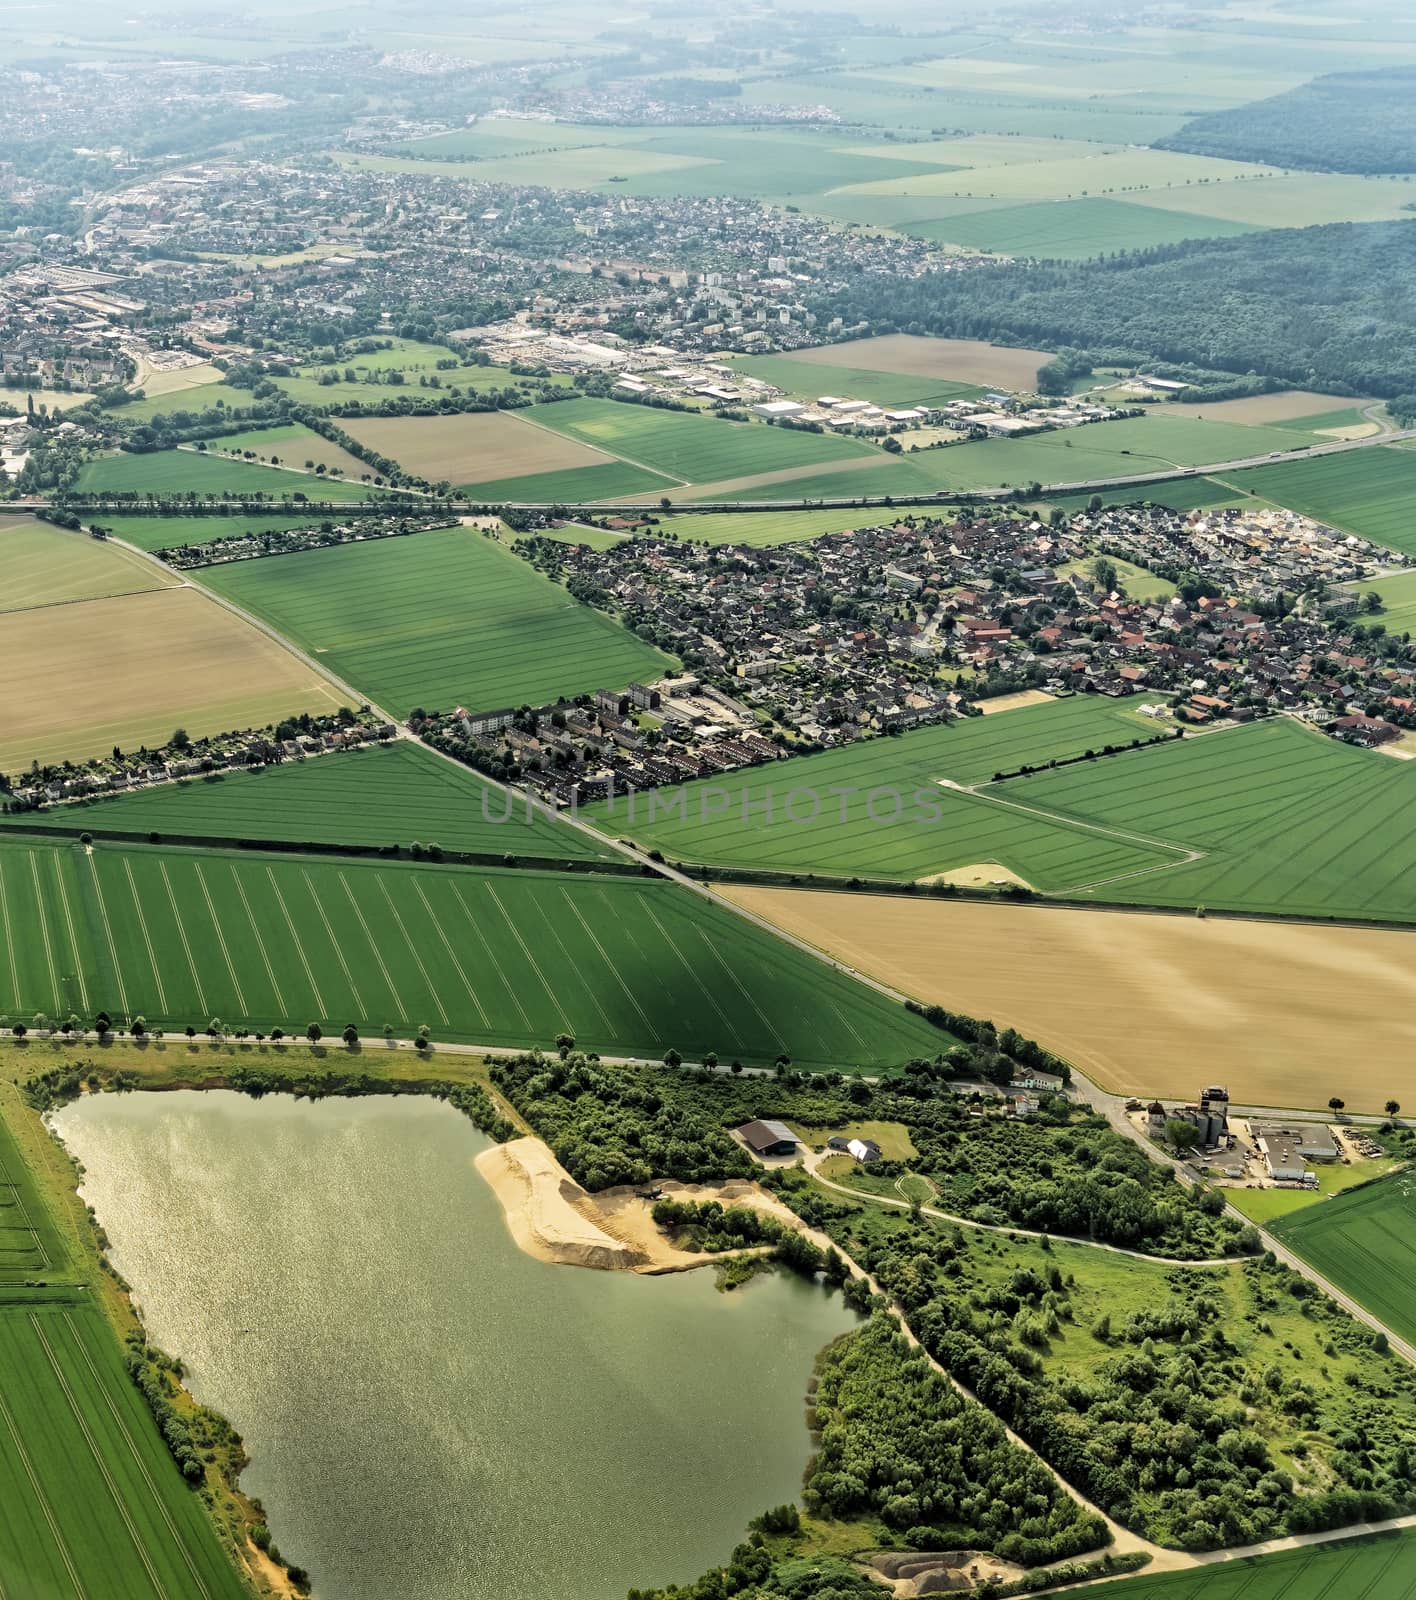 Suburb of Braunschweig, Germany with a water-filled former gravel pit in the foreground, village structure with fields and meadows, aerial photo, light aircraft